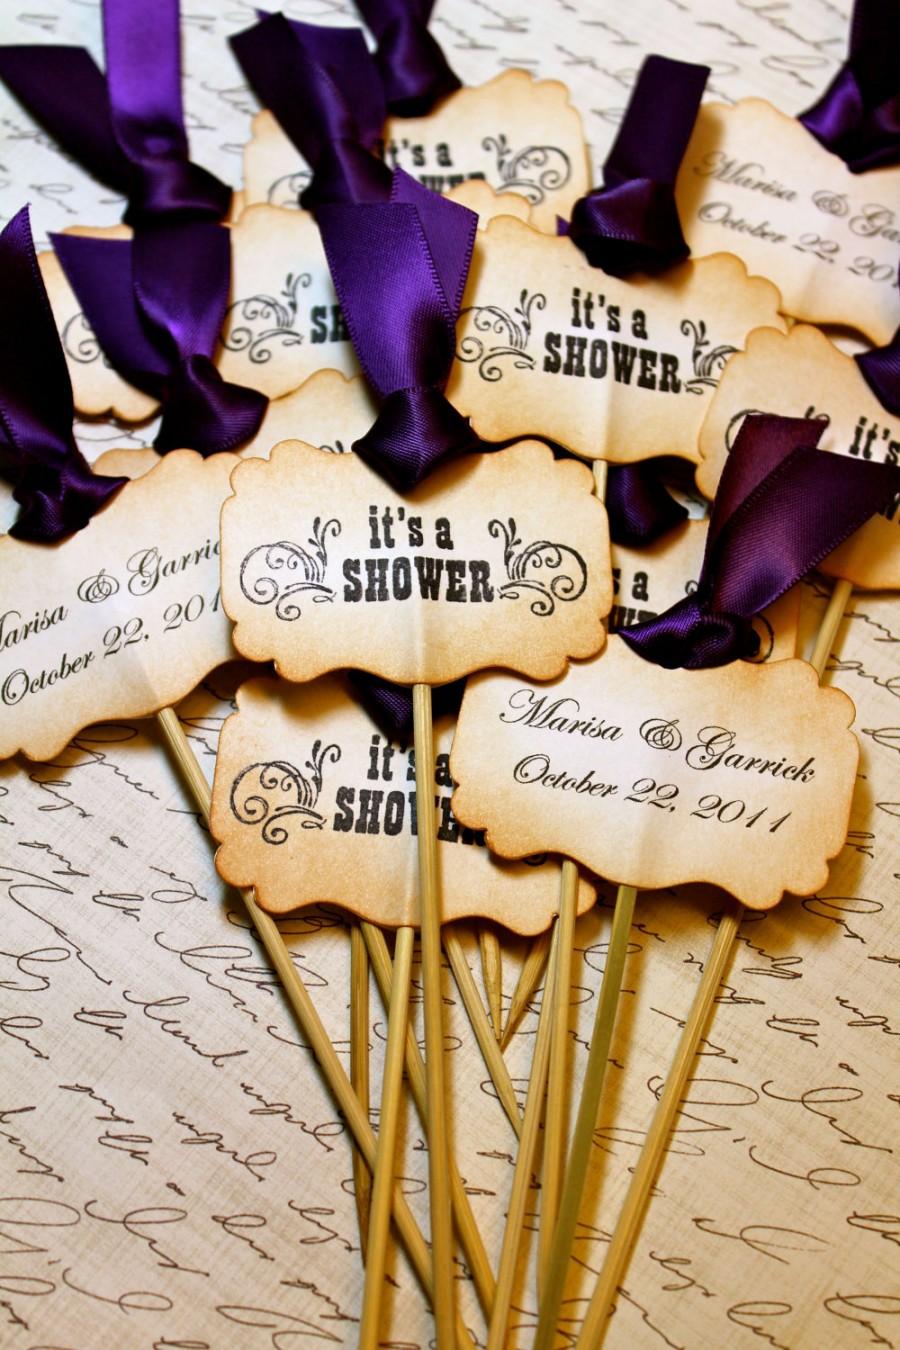 Wedding - Vintage Inspired Wedding & Bridal Shower Cupcake Toppers - Set of 12 - Personalized - You Choose Ribbon Color